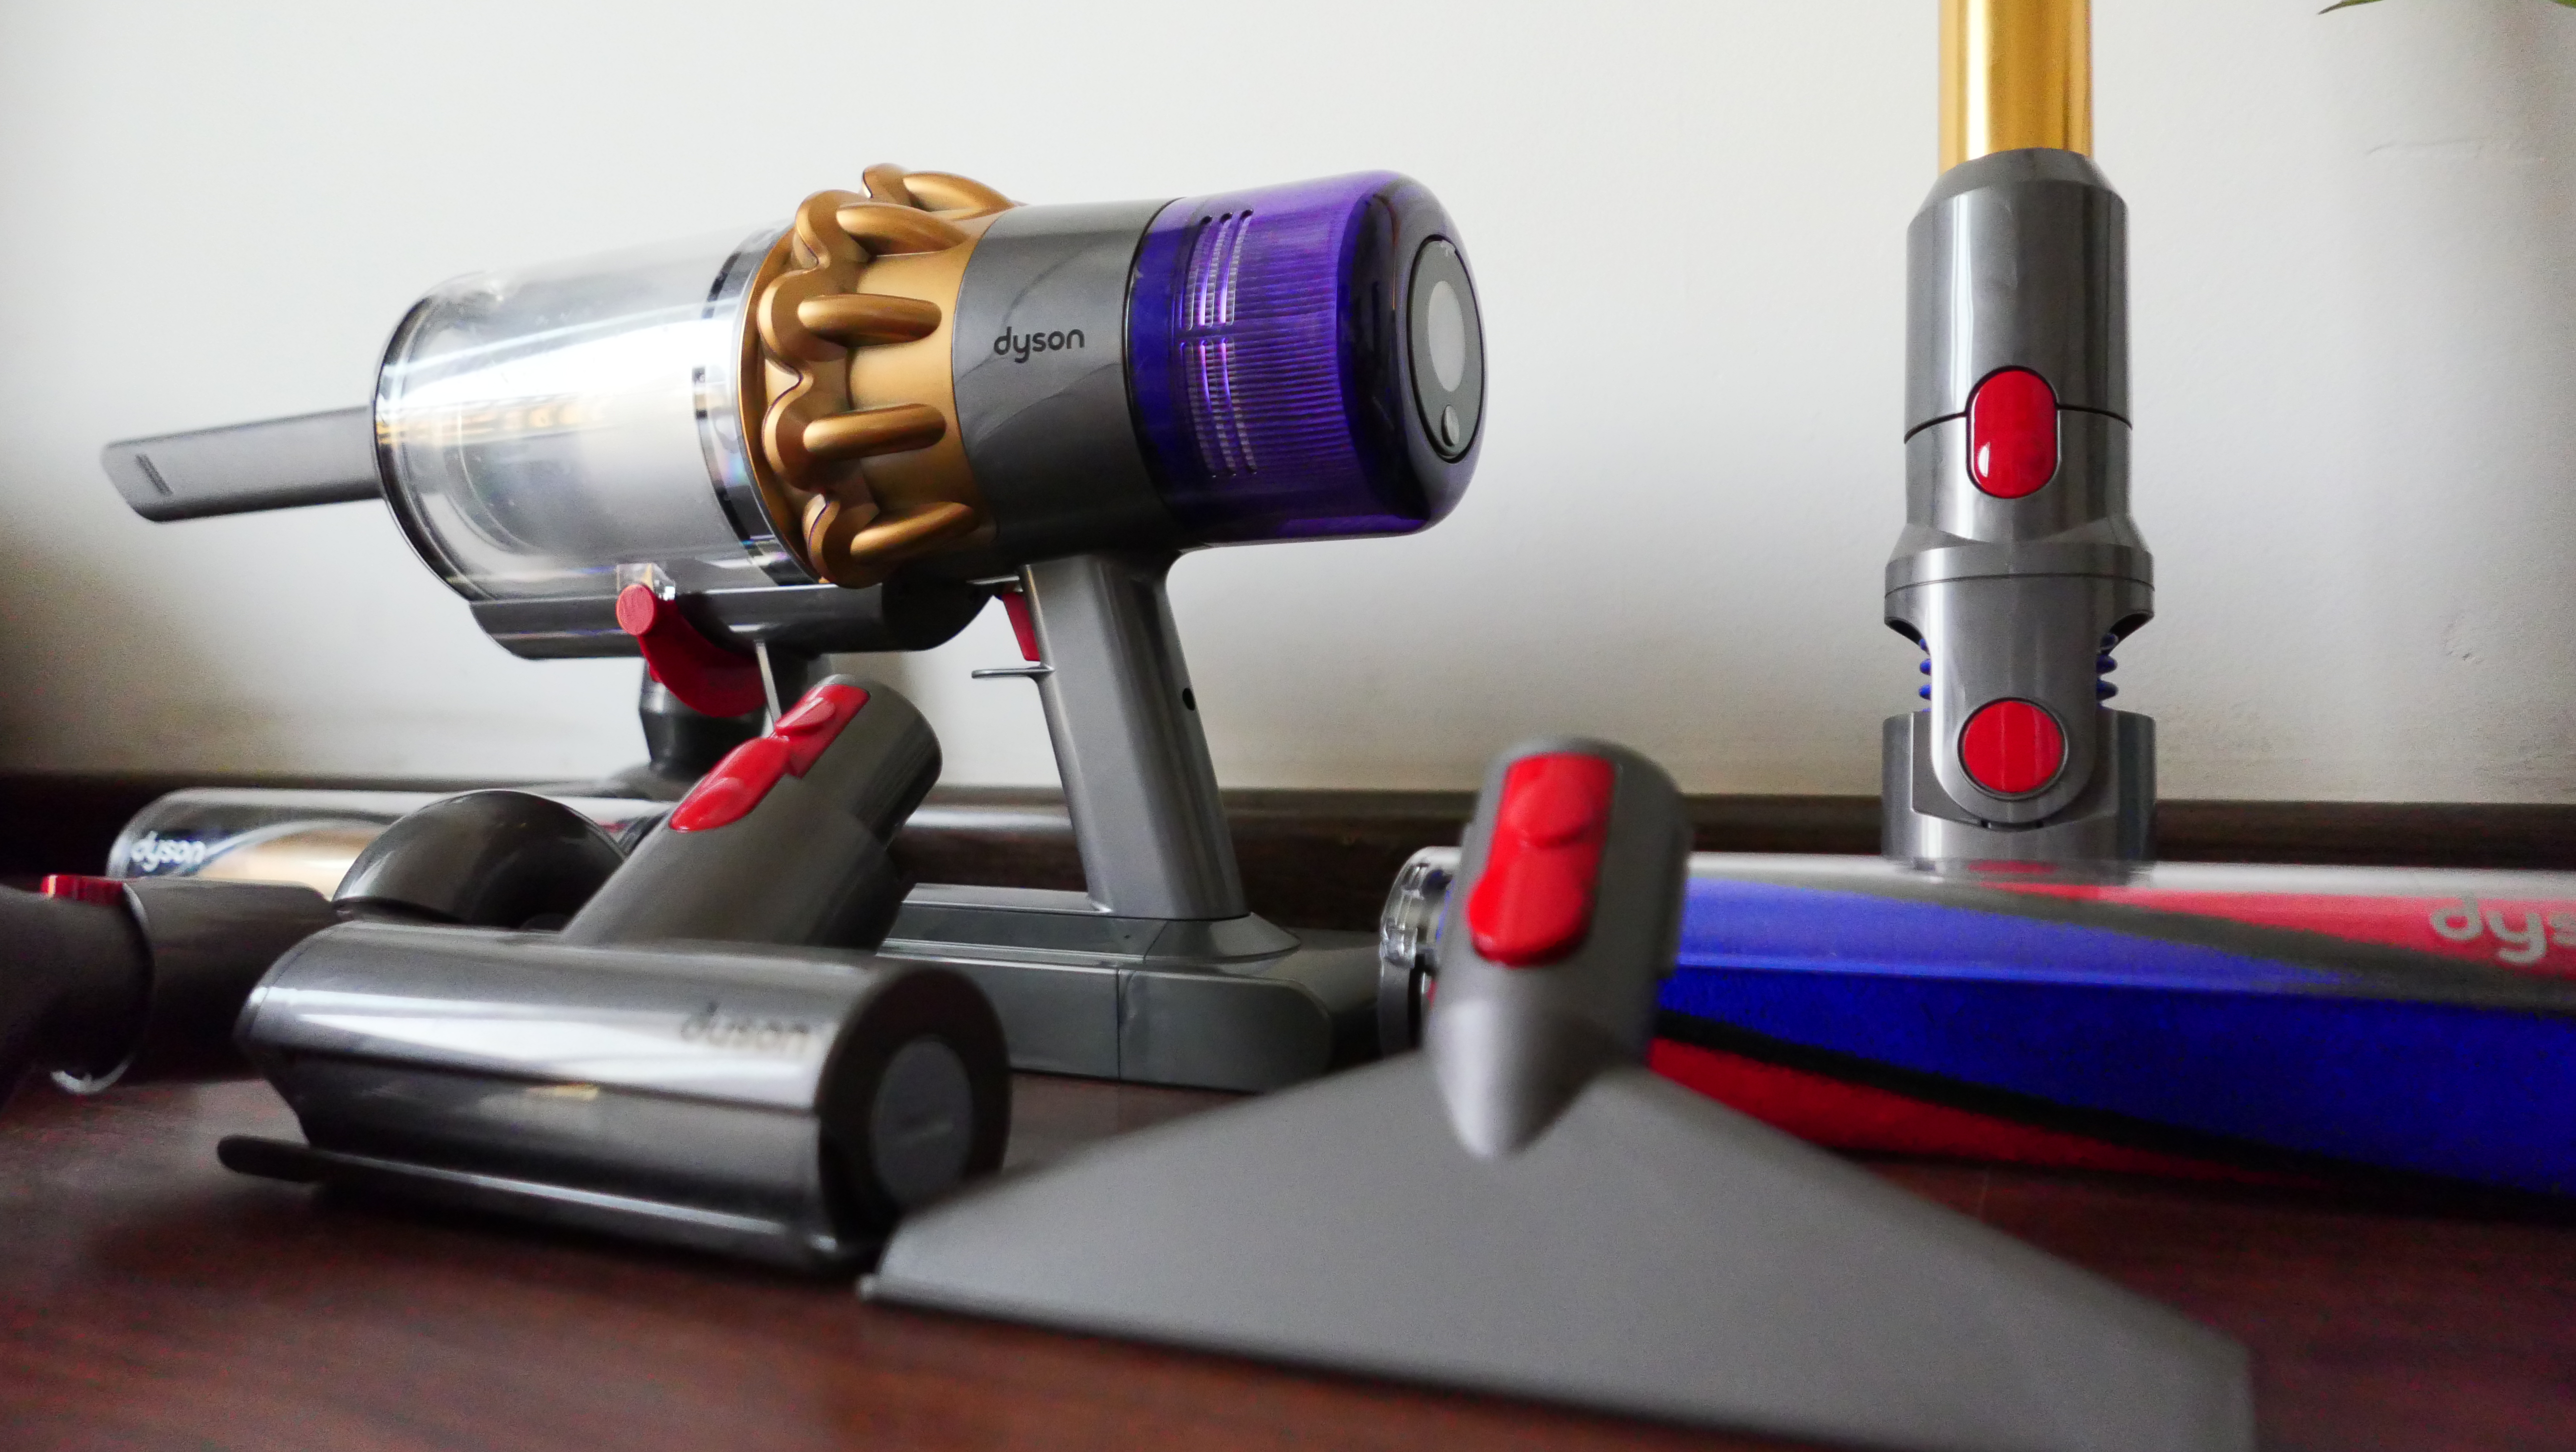 Dyson V11 Absolute Pro Expert